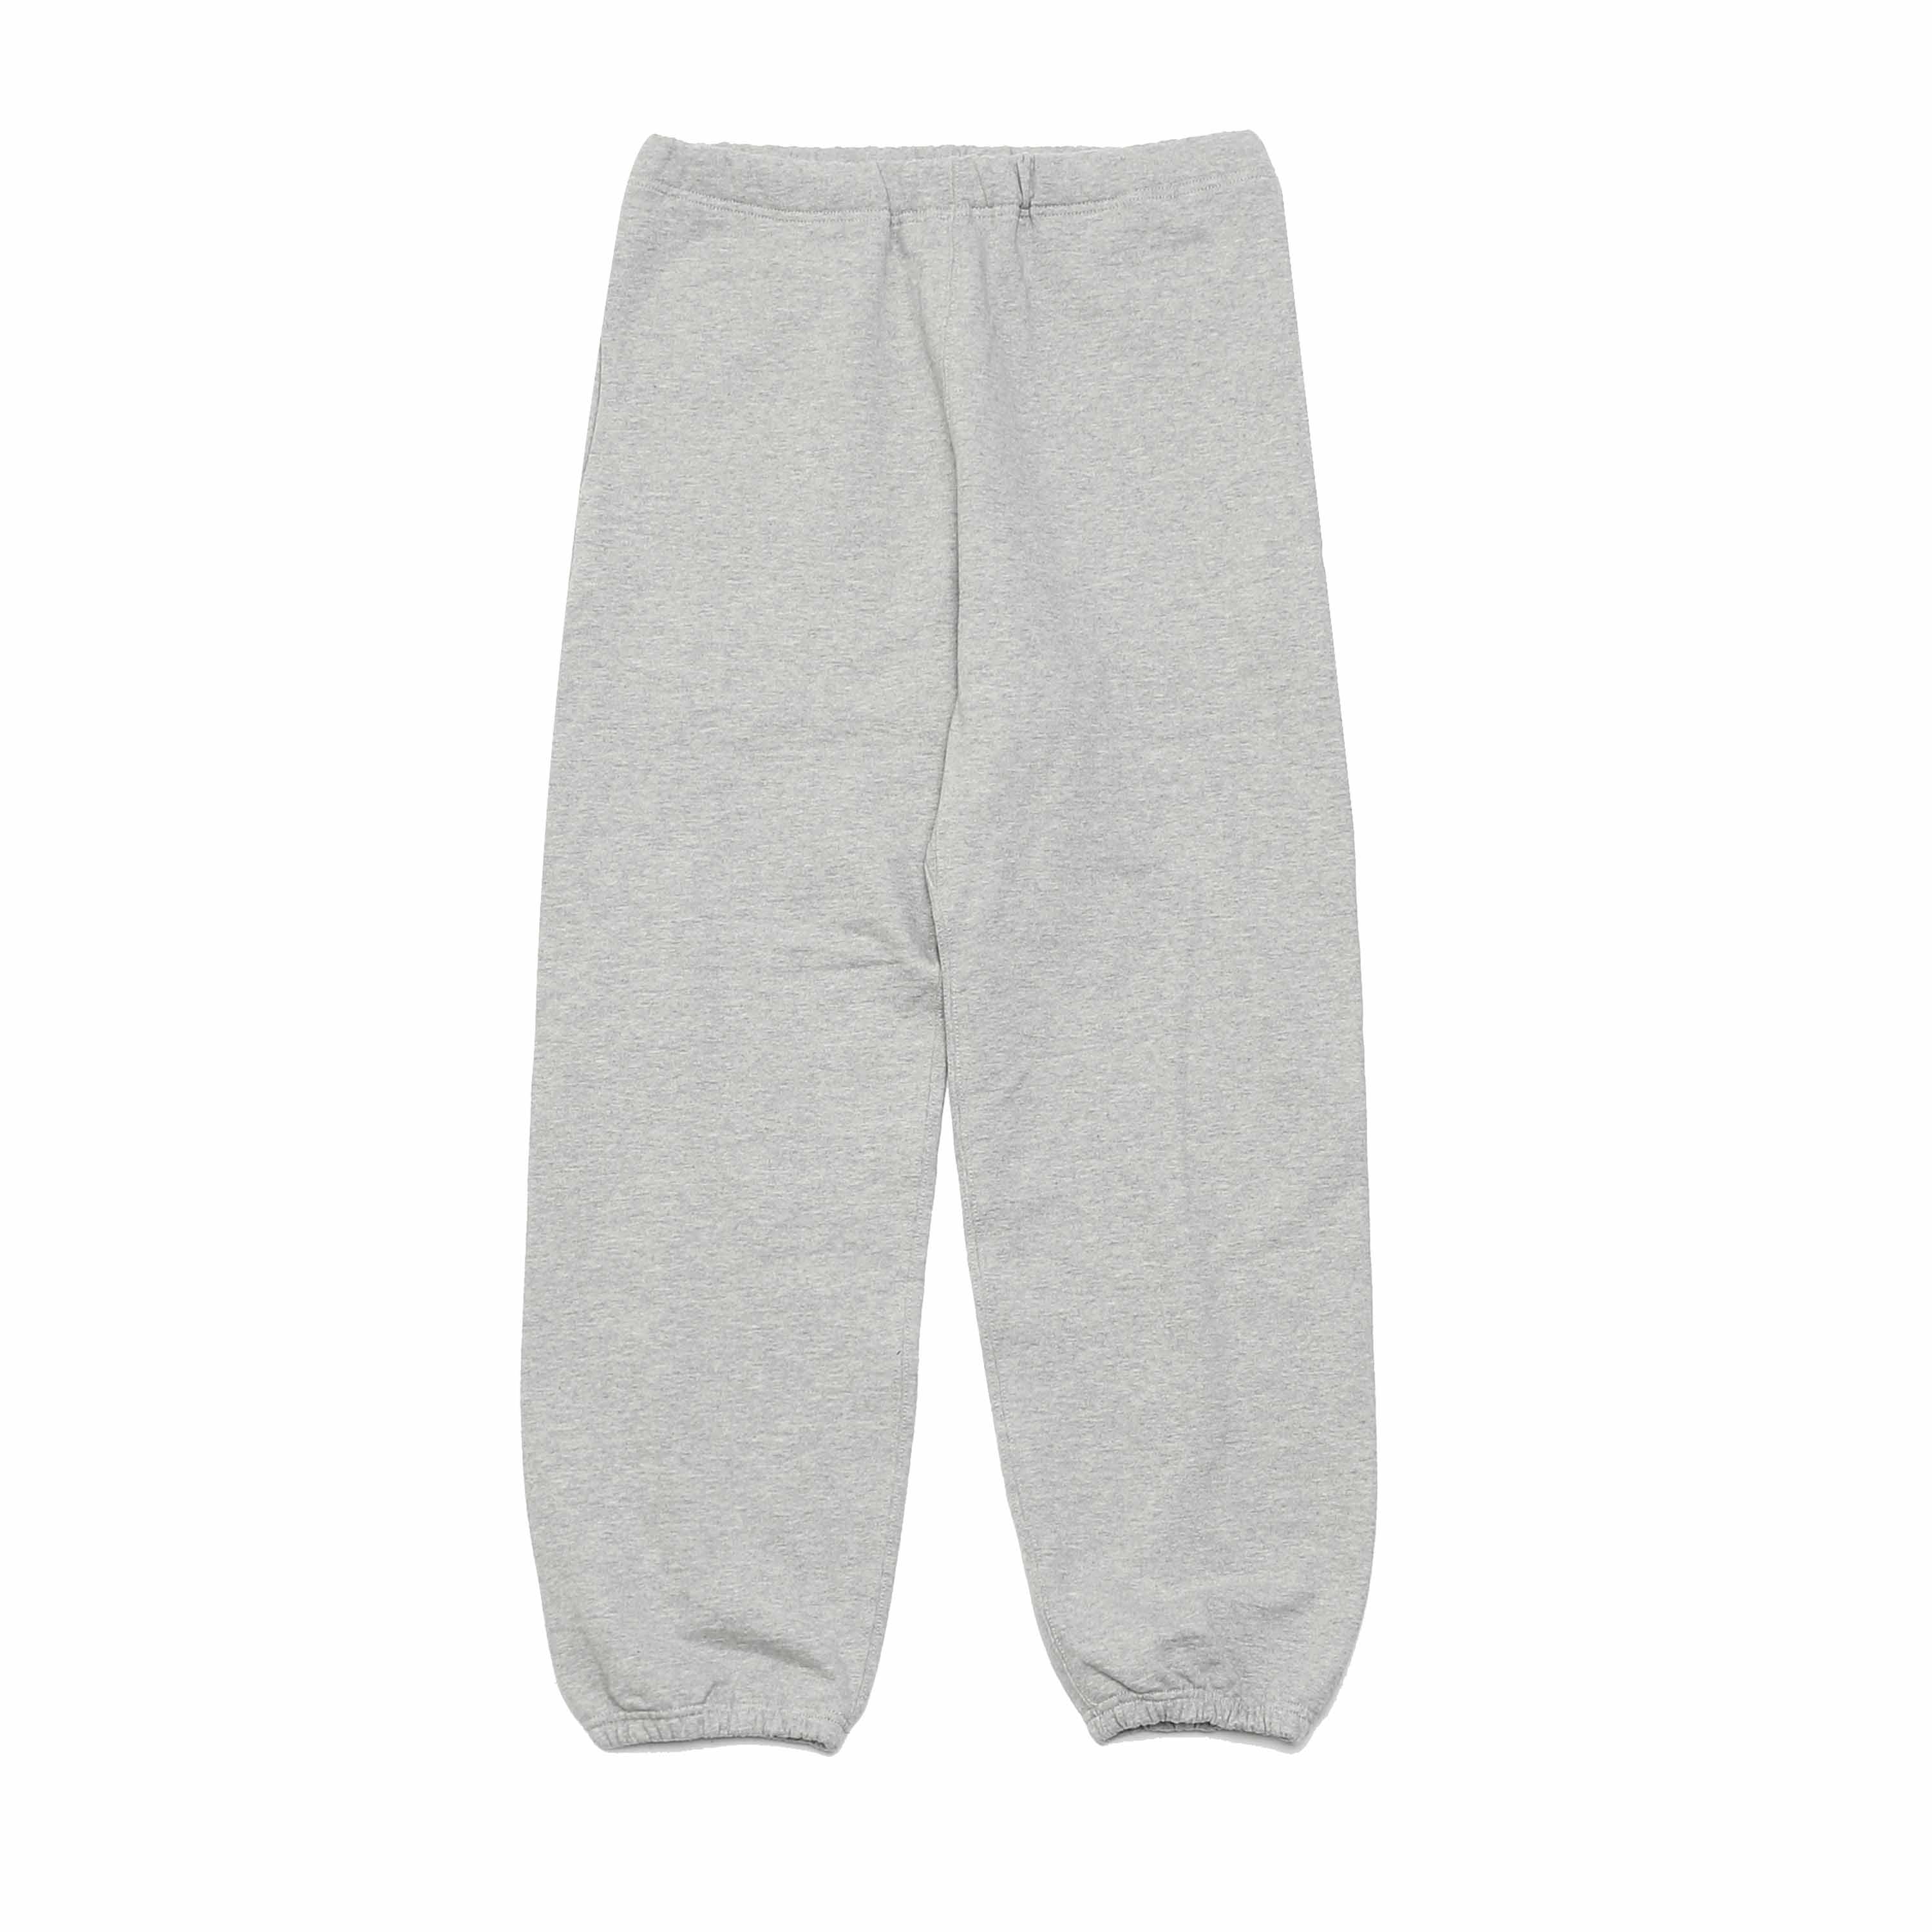 RECYCLED COTTON SWEAT PANTS - GREY